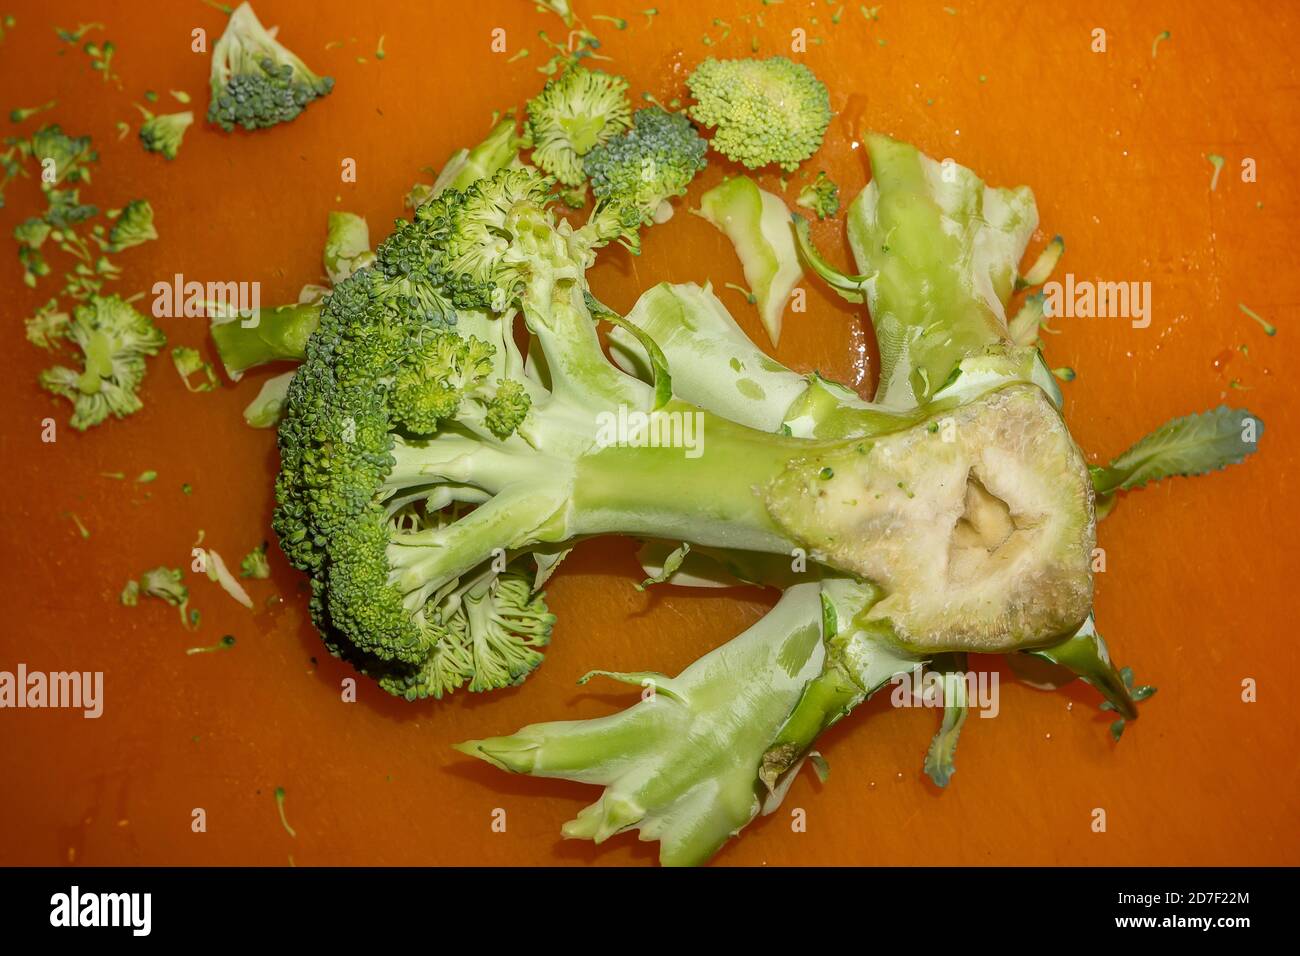 The end of a trimmed broccoli crown  in New York on Monday, October 19, 2020. (© Richard B. Levine) Stock Photo